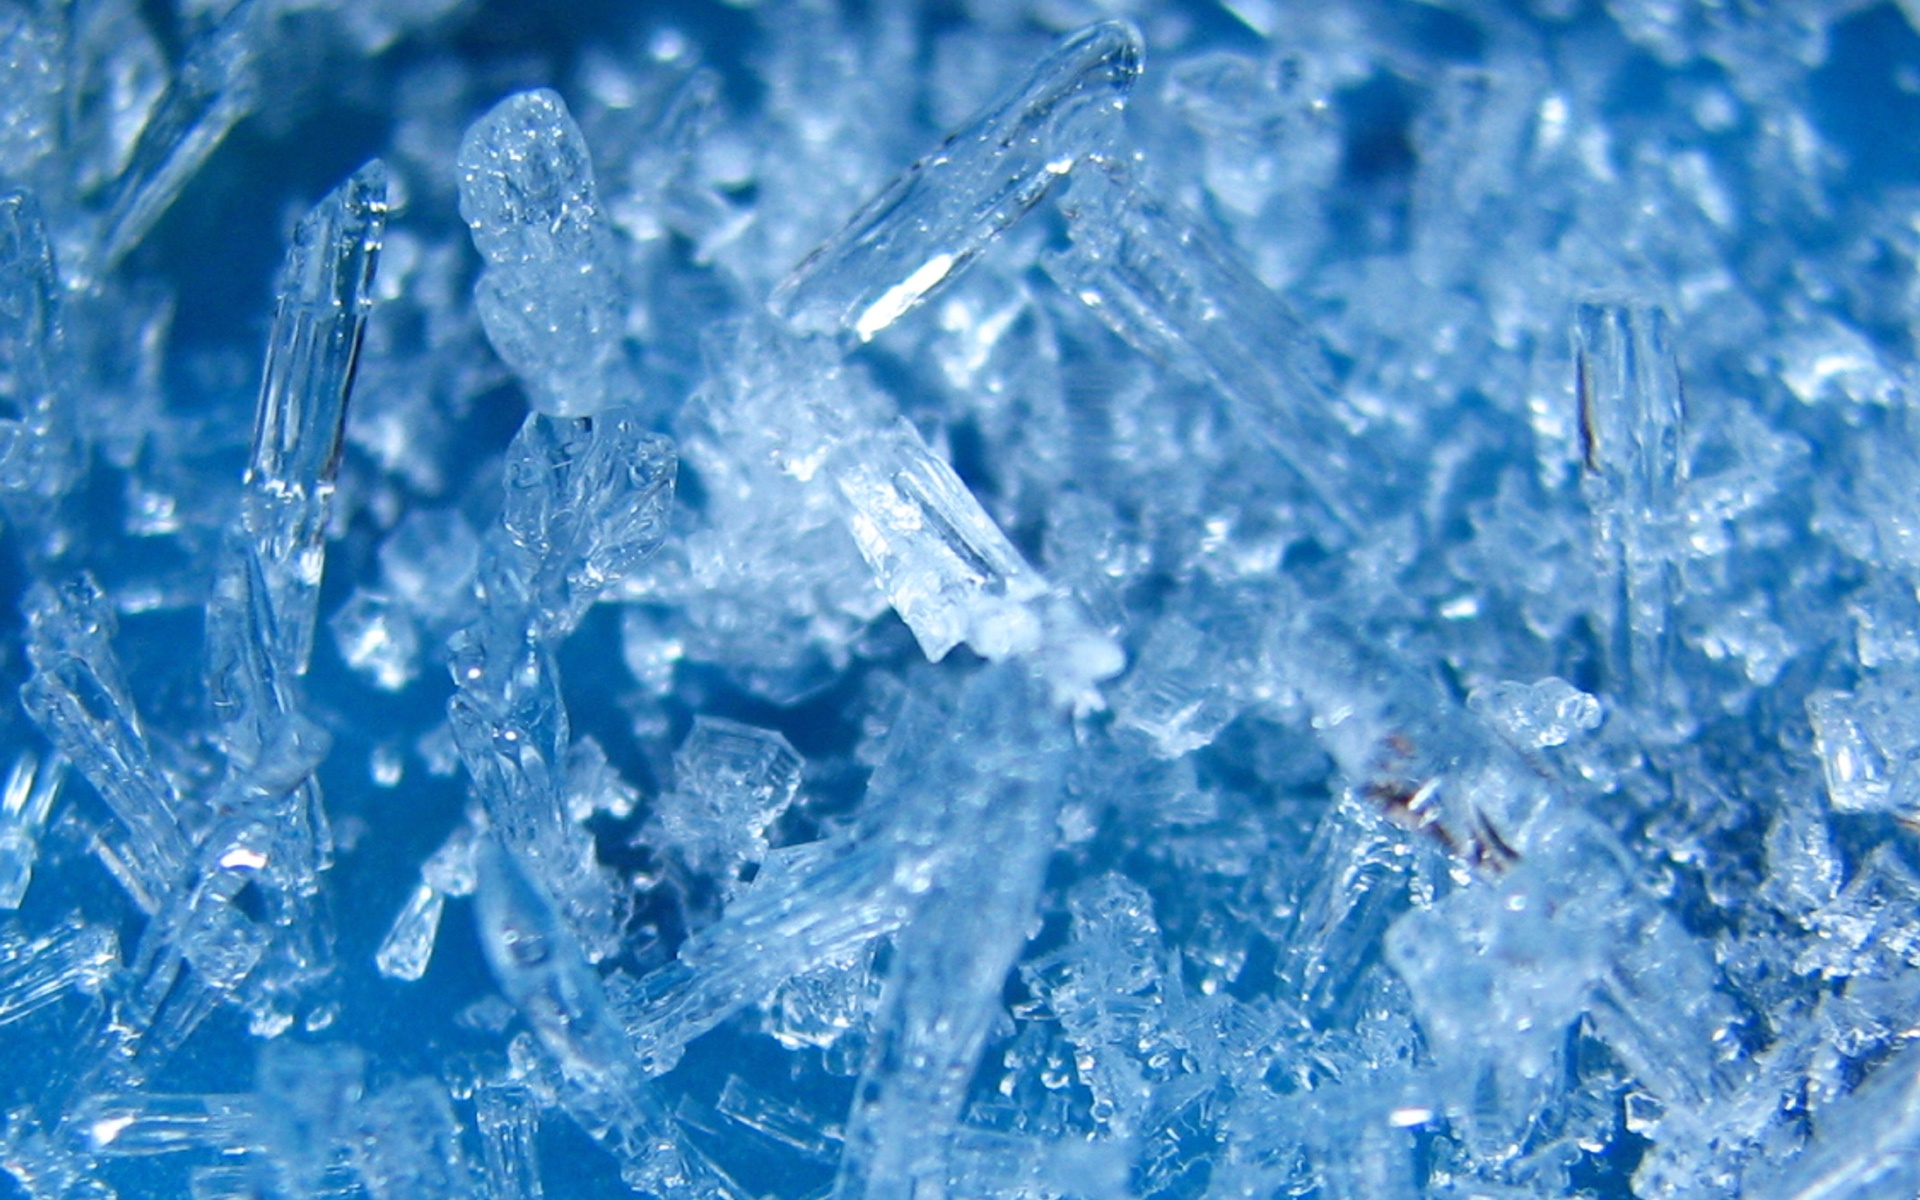 Ice crystals 1920x1200 wallpaper download page 672121